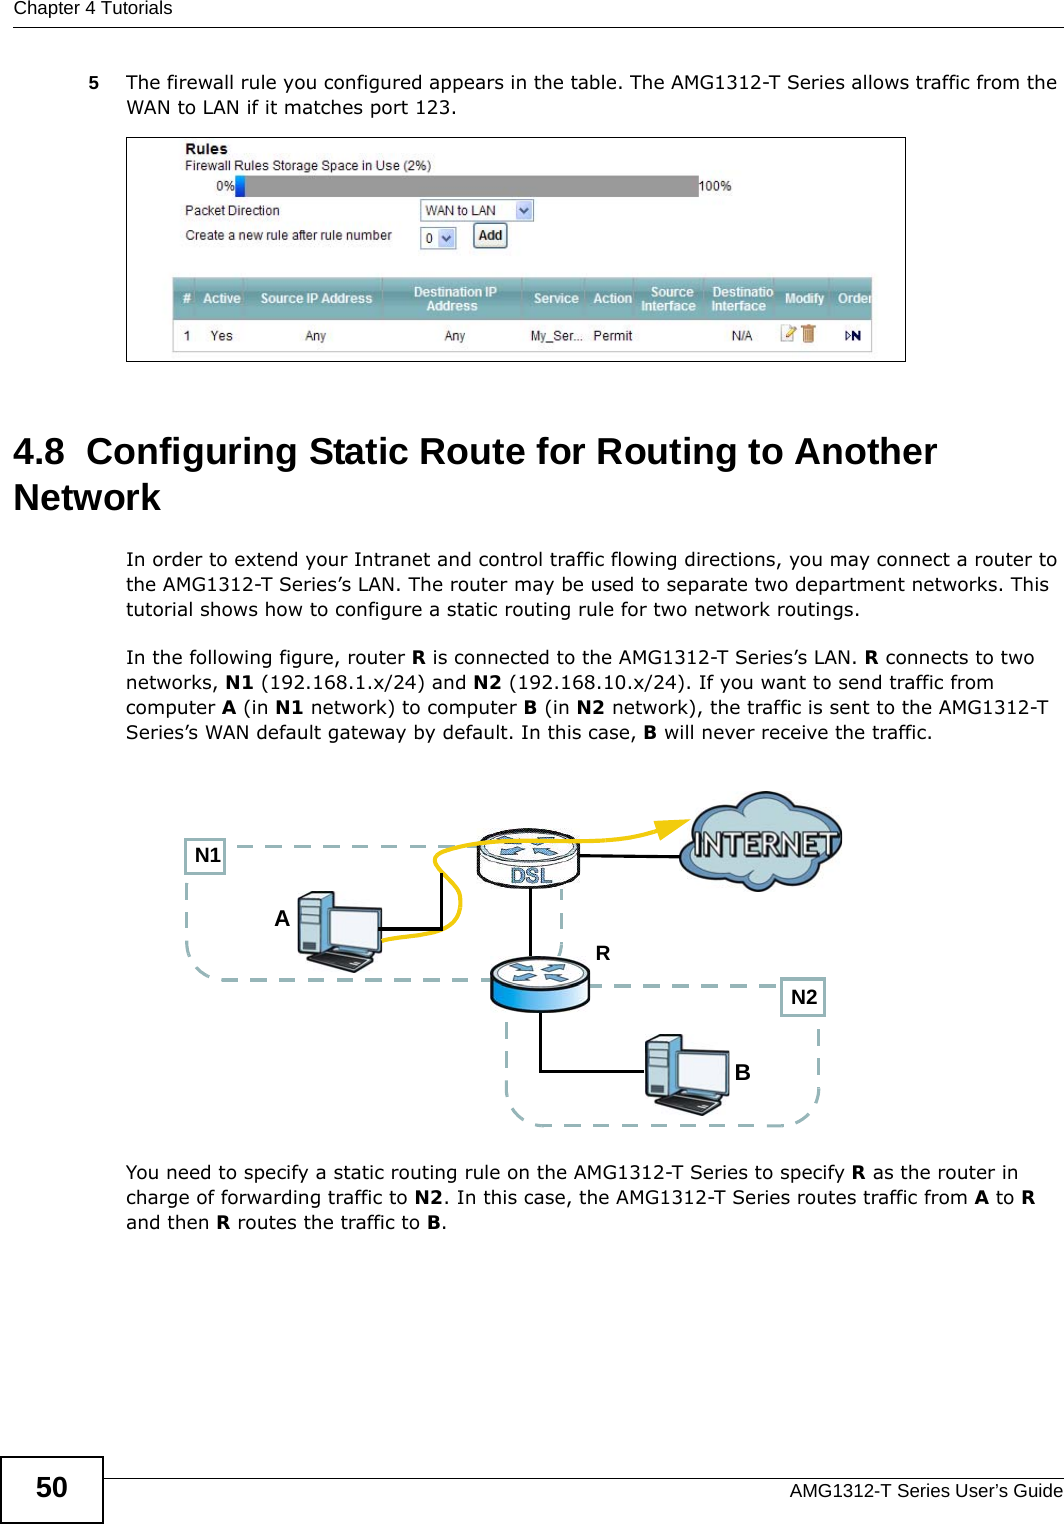 Chapter 4 TutorialsAMG1312-T Series User’s Guide505The firewall rule you configured appears in the table. The AMG1312-T Series allows traffic from the WAN to LAN if it matches port 123. 4.8  Configuring Static Route for Routing to Another NetworkIn order to extend your Intranet and control traffic flowing directions, you may connect a router to the AMG1312-T Series’s LAN. The router may be used to separate two department networks. This tutorial shows how to configure a static routing rule for two network routings.In the following figure, router R is connected to the AMG1312-T Series’s LAN. R connects to two networks, N1 (192.168.1.x/24) and N2 (192.168.10.x/24). If you want to send traffic from computer A (in N1 network) to computer B (in N2 network), the traffic is sent to the AMG1312-T Series’s WAN default gateway by default. In this case, B will never receive the traffic.You need to specify a static routing rule on the AMG1312-T Series to specify R as the router in charge of forwarding traffic to N2. In this case, the AMG1312-T Series routes traffic from A to R and then R routes the traffic to B.N2BN1AR